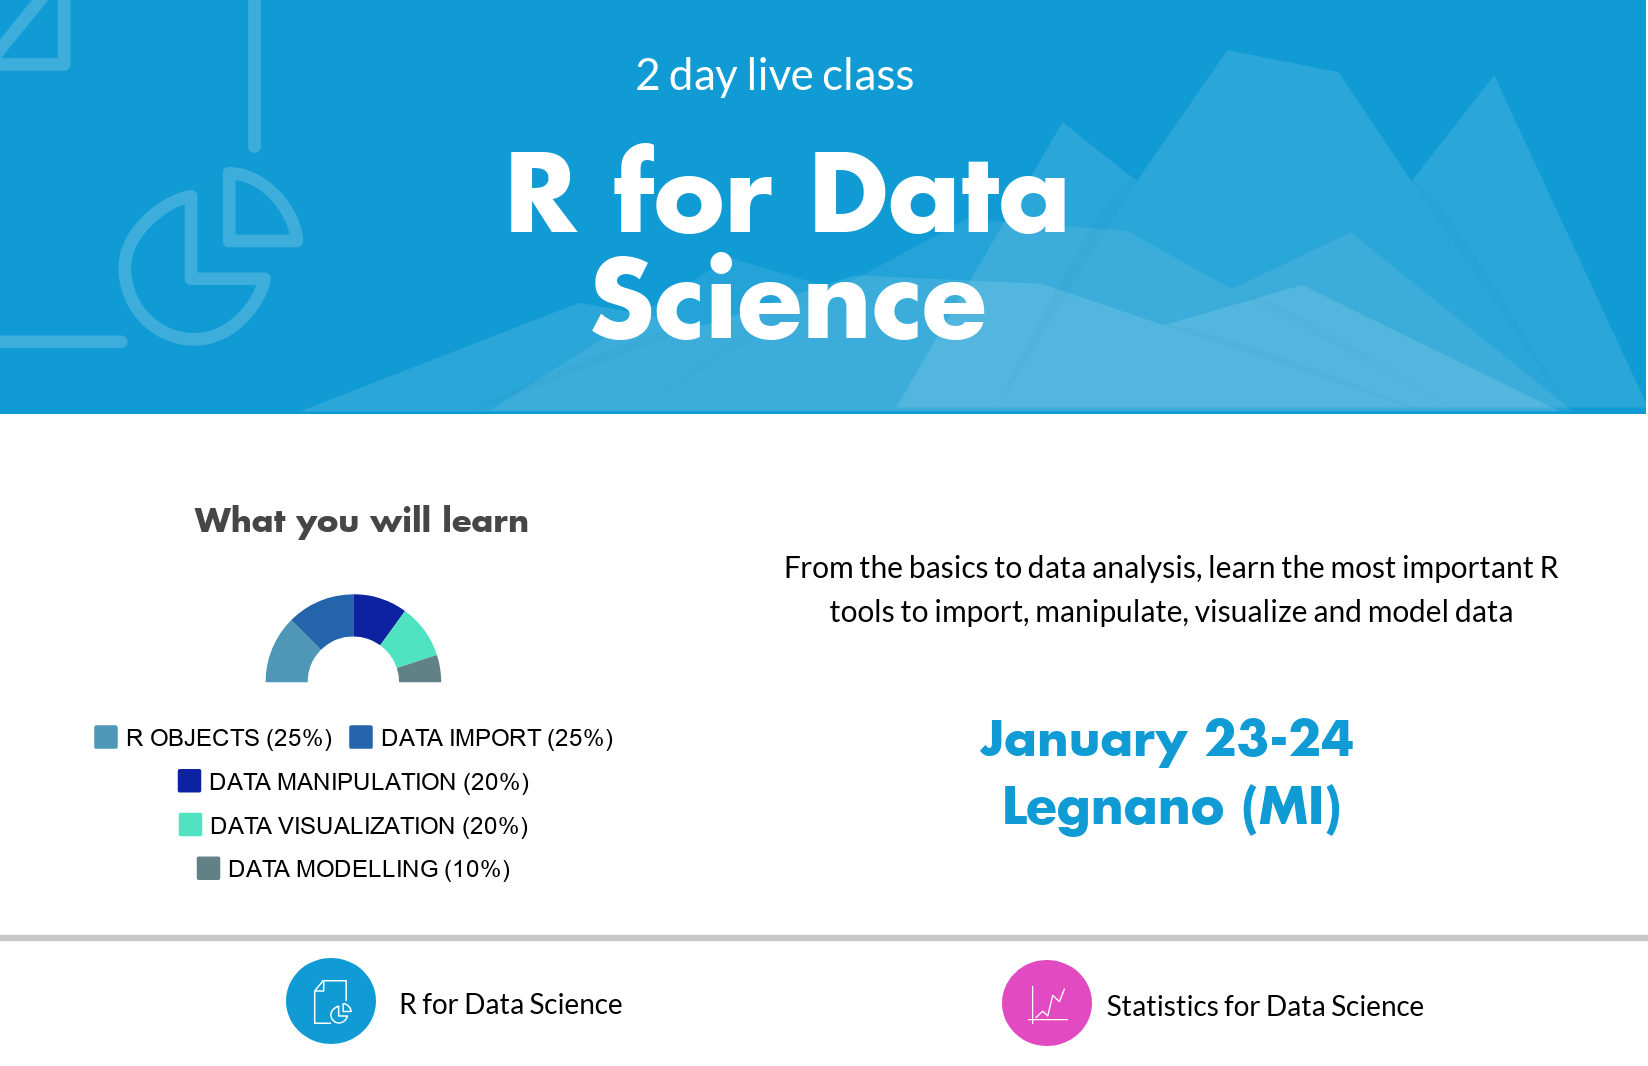 01.23.2019 - R for Data Science